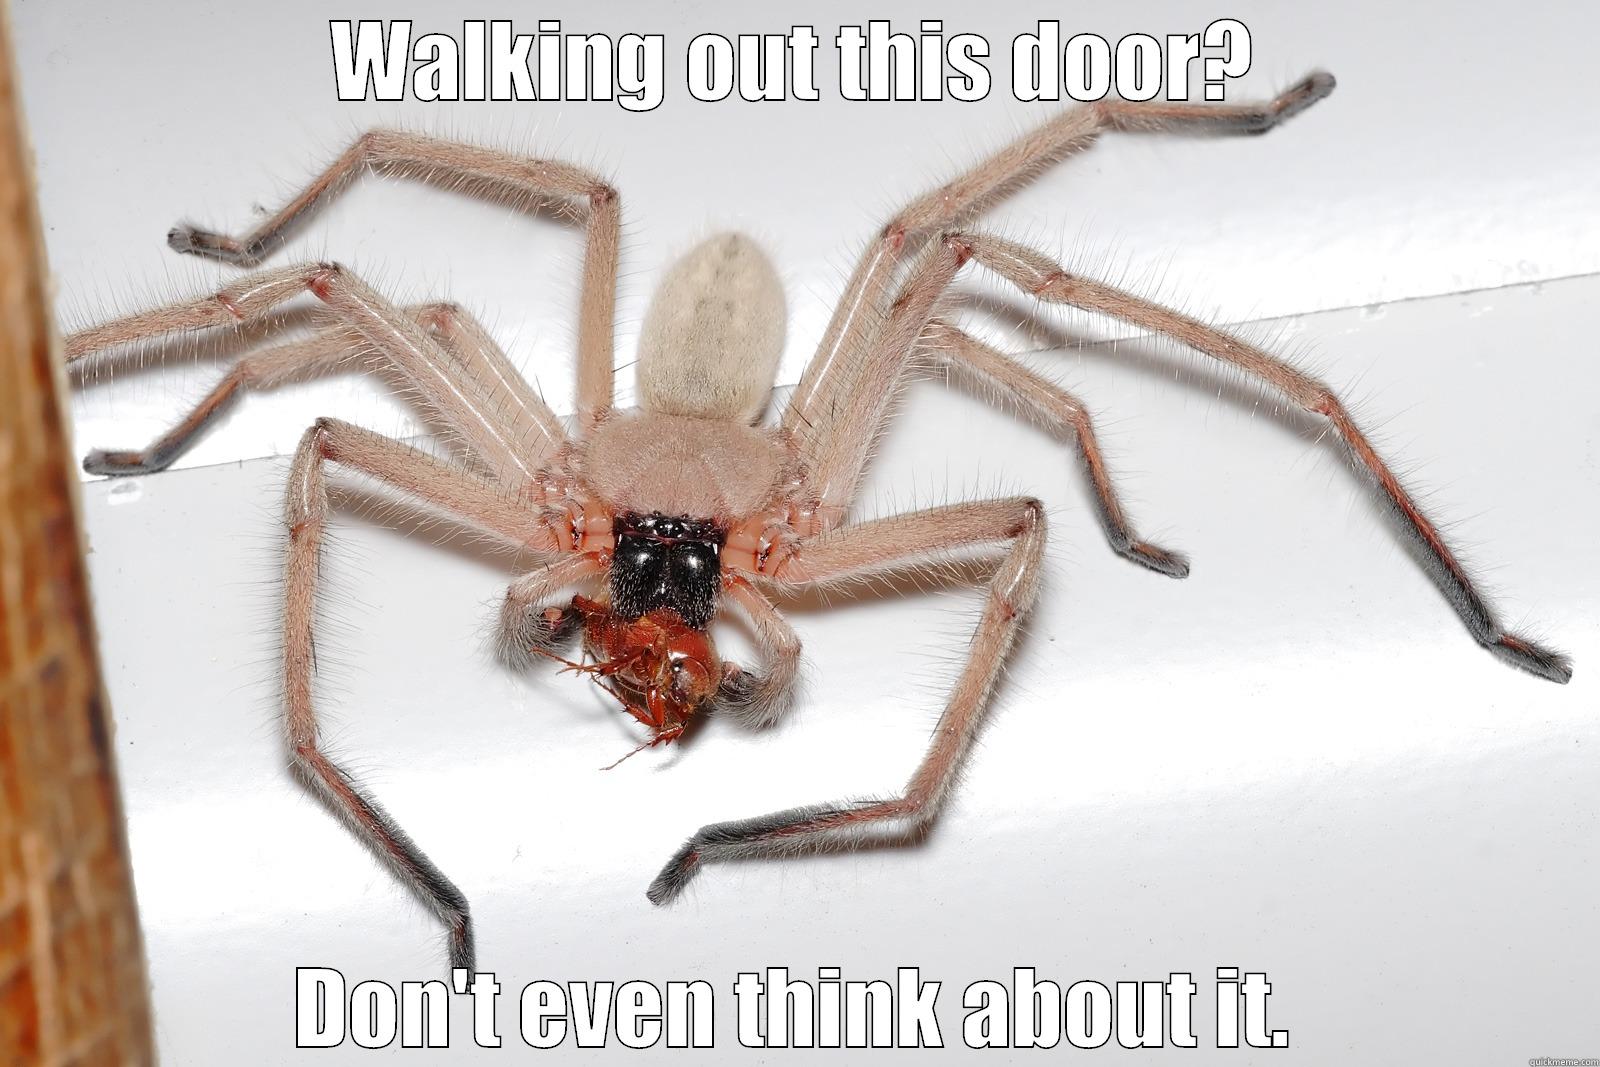 Huntsman Spider says no - WALKING OUT THIS DOOR? DON'T EVEN THINK ABOUT IT. Misc